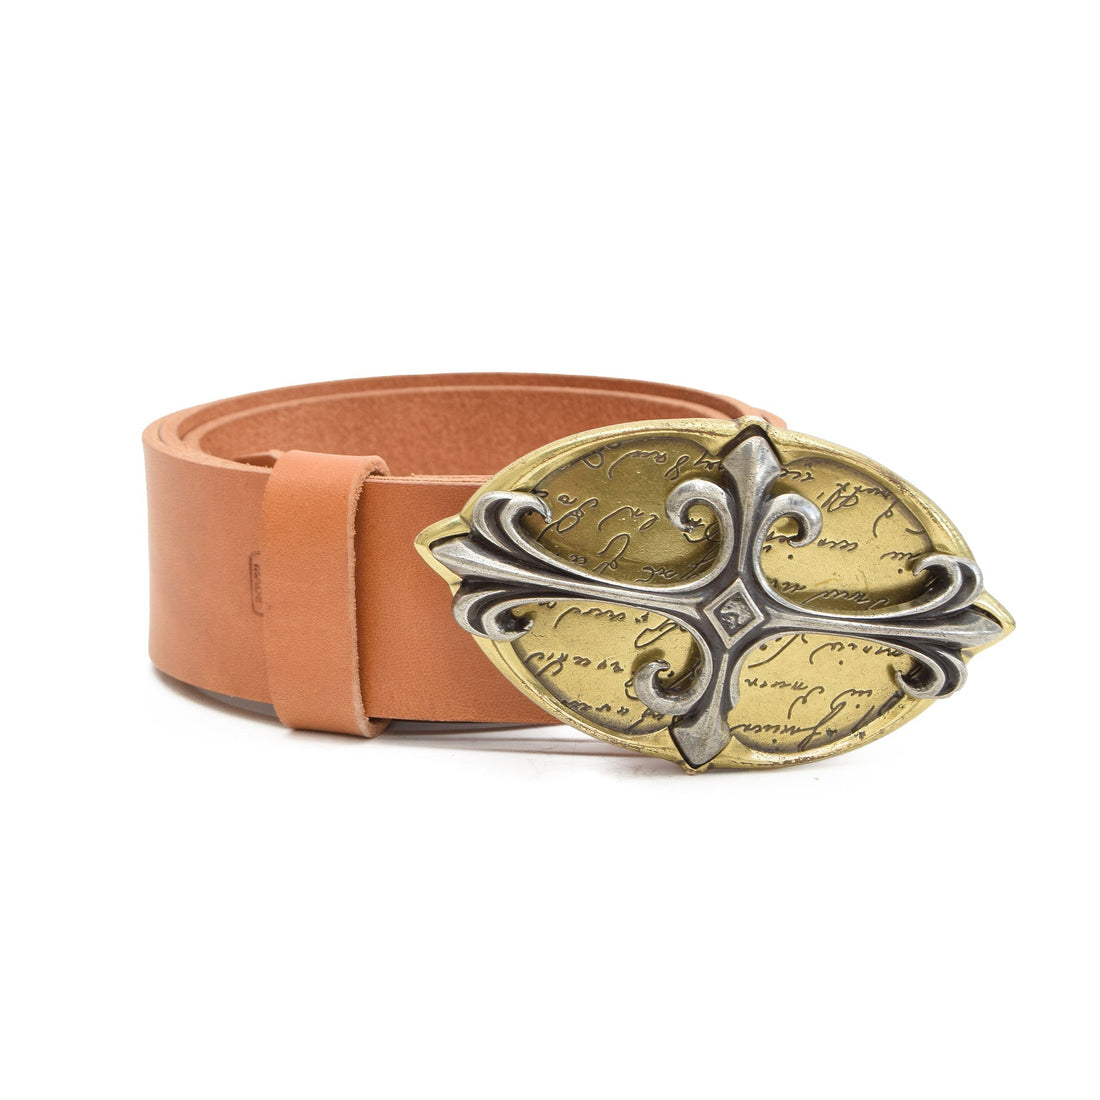 Touch Leather Belt Tan with Changeable Buckle - 80 - Belts Zengoda Shop online from Artisan Brands